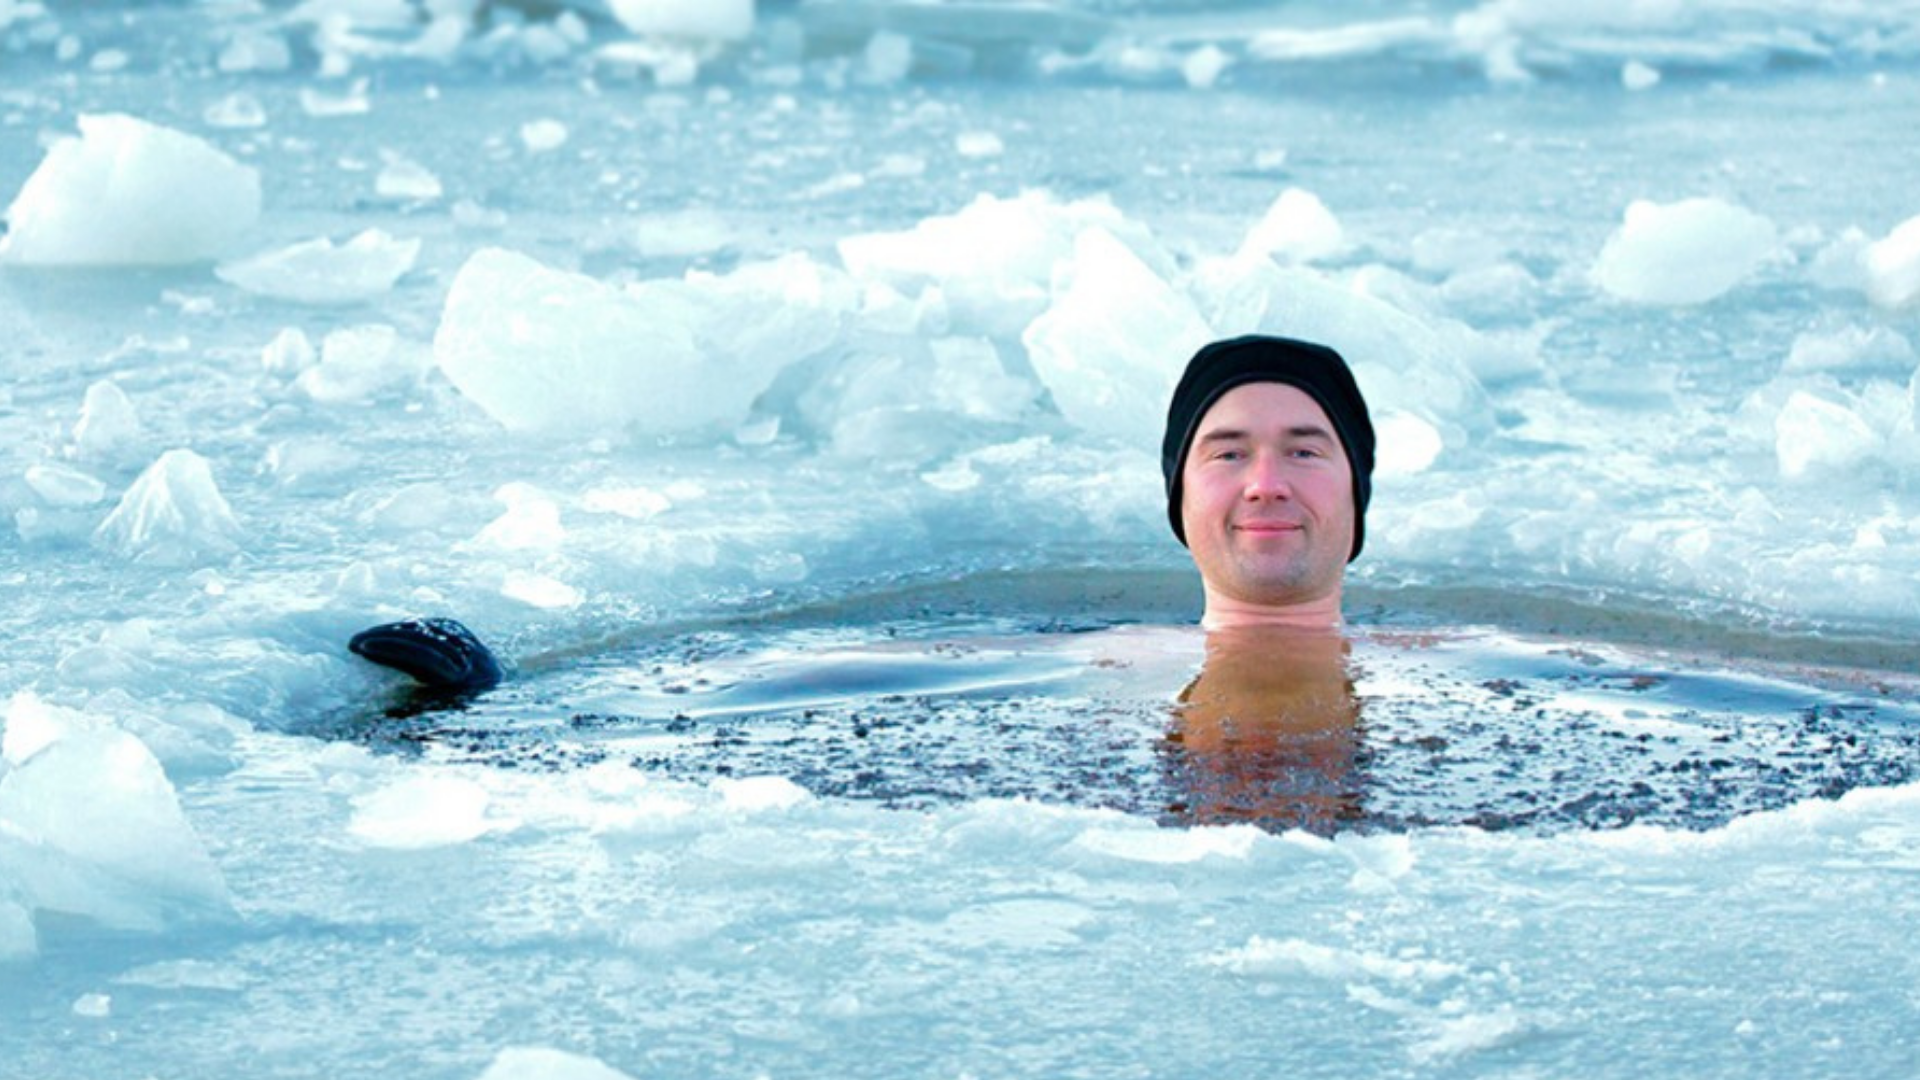 https://www.bbcearth.com/blog/?article=can-an-icy-swim-help-you-lose-weight